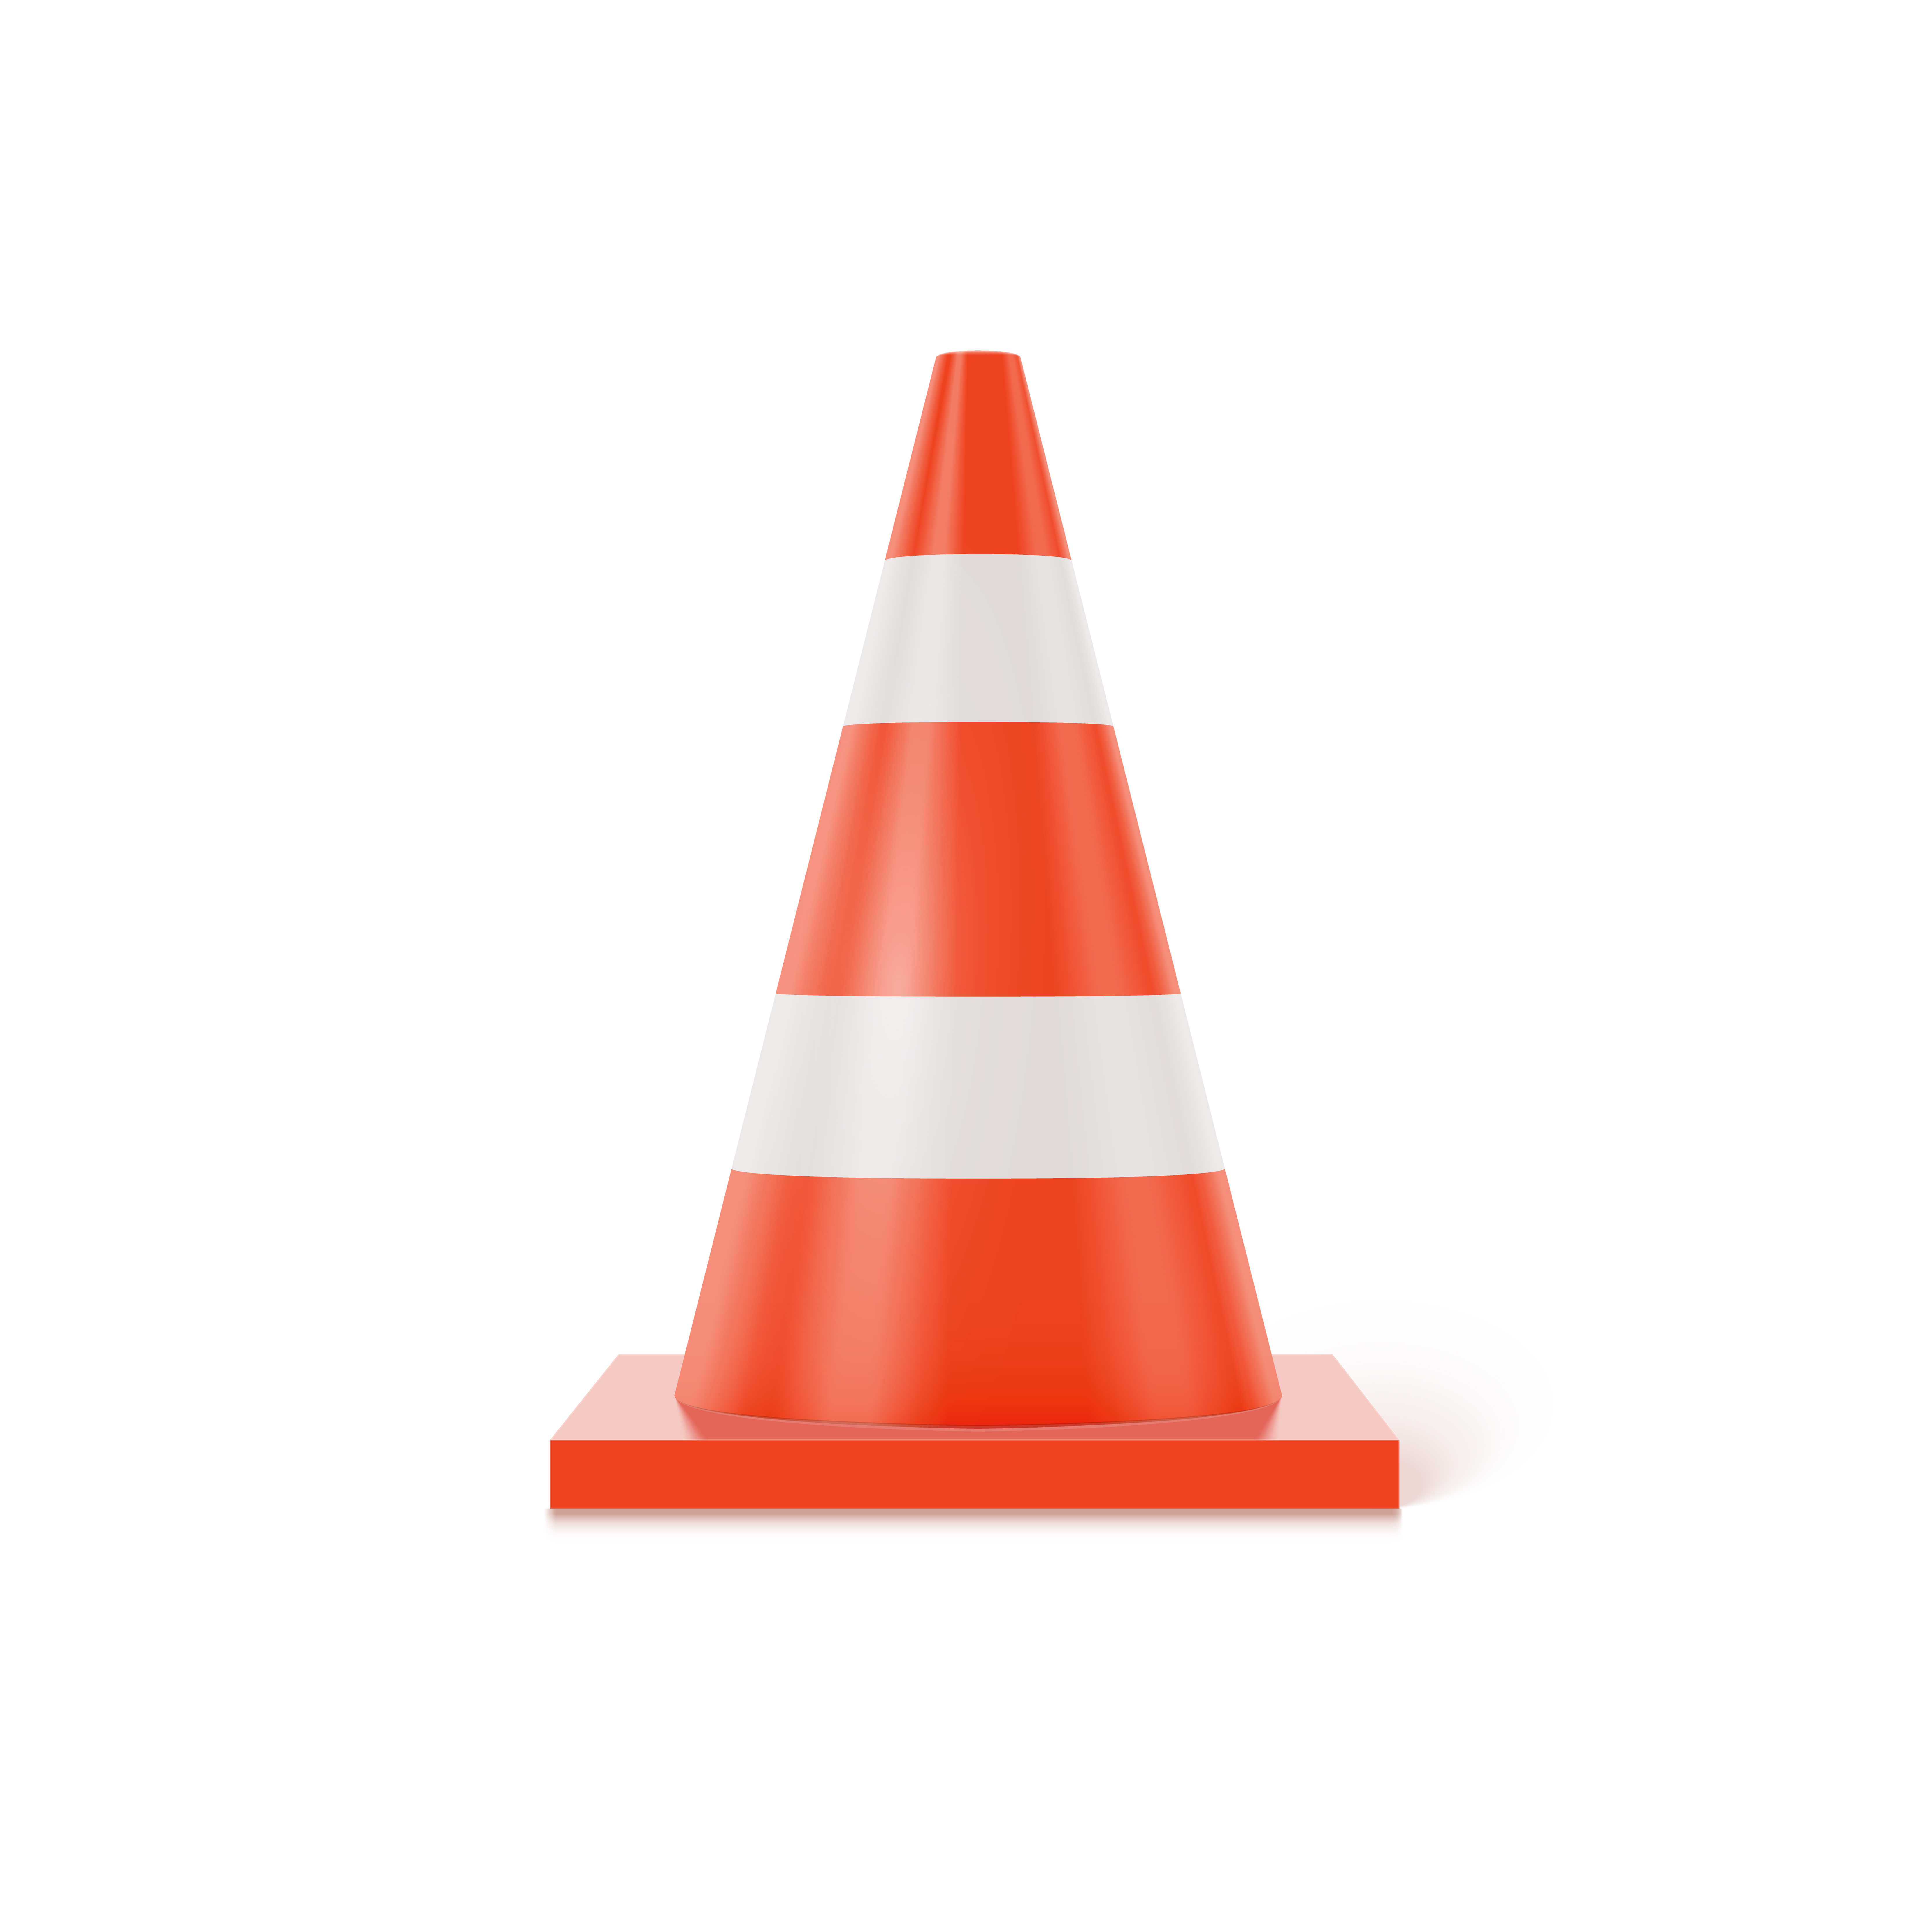 Download 3d traffic cone with white and orange stripes on white background,...